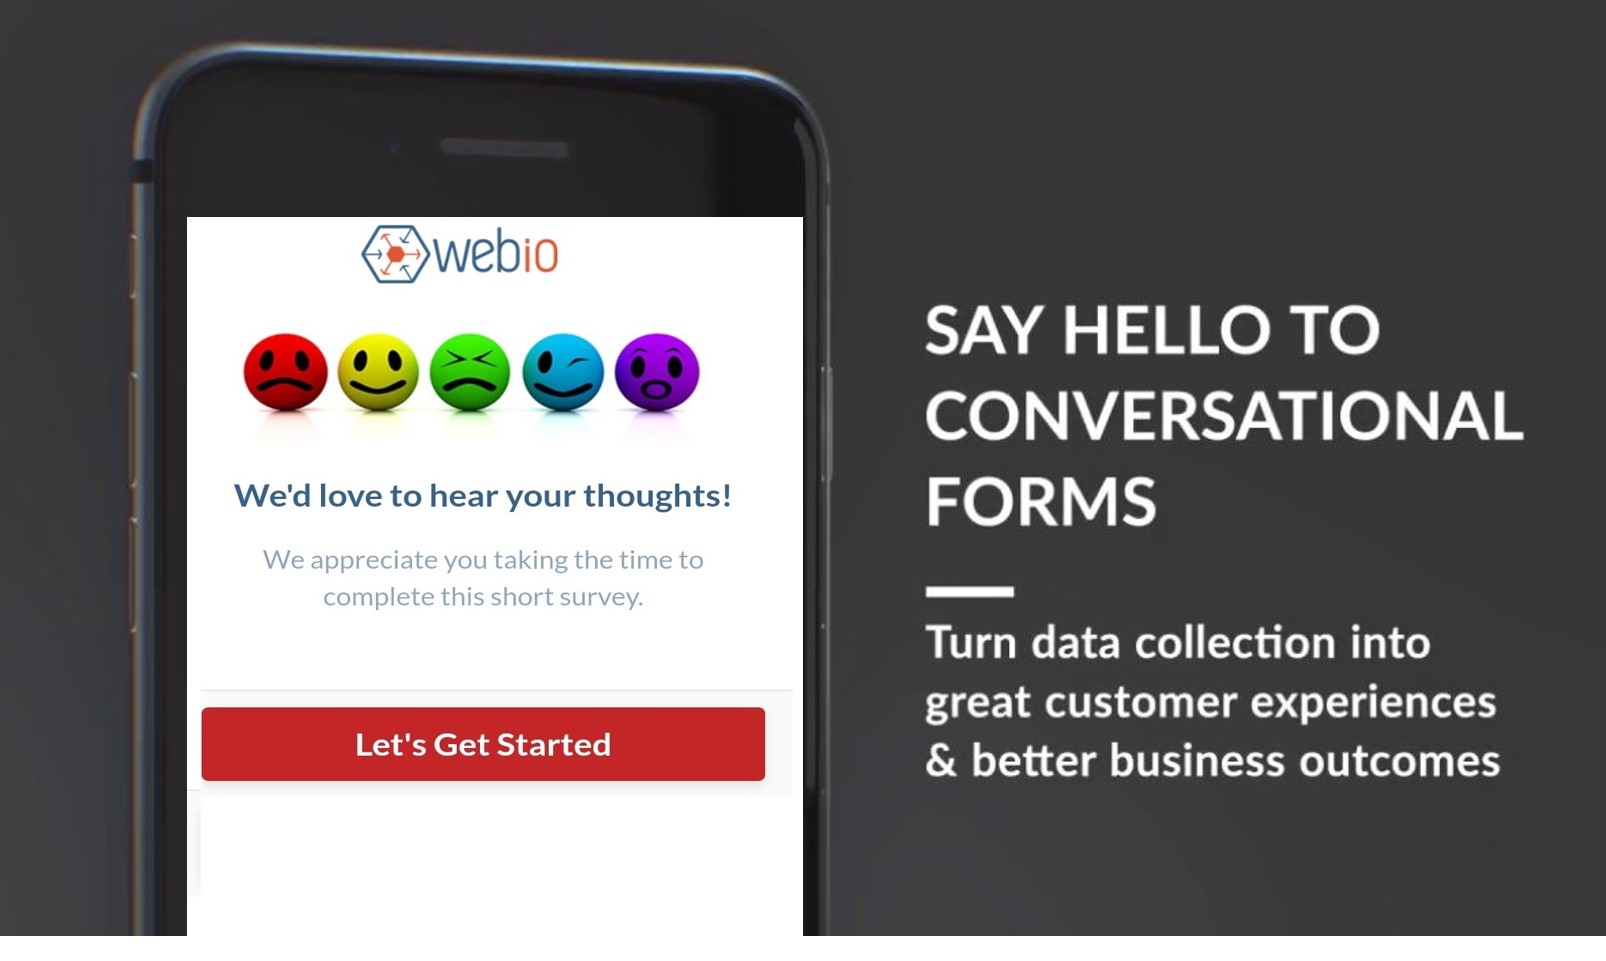 Webio Launches Customer Conversational Forms for the Enterprise